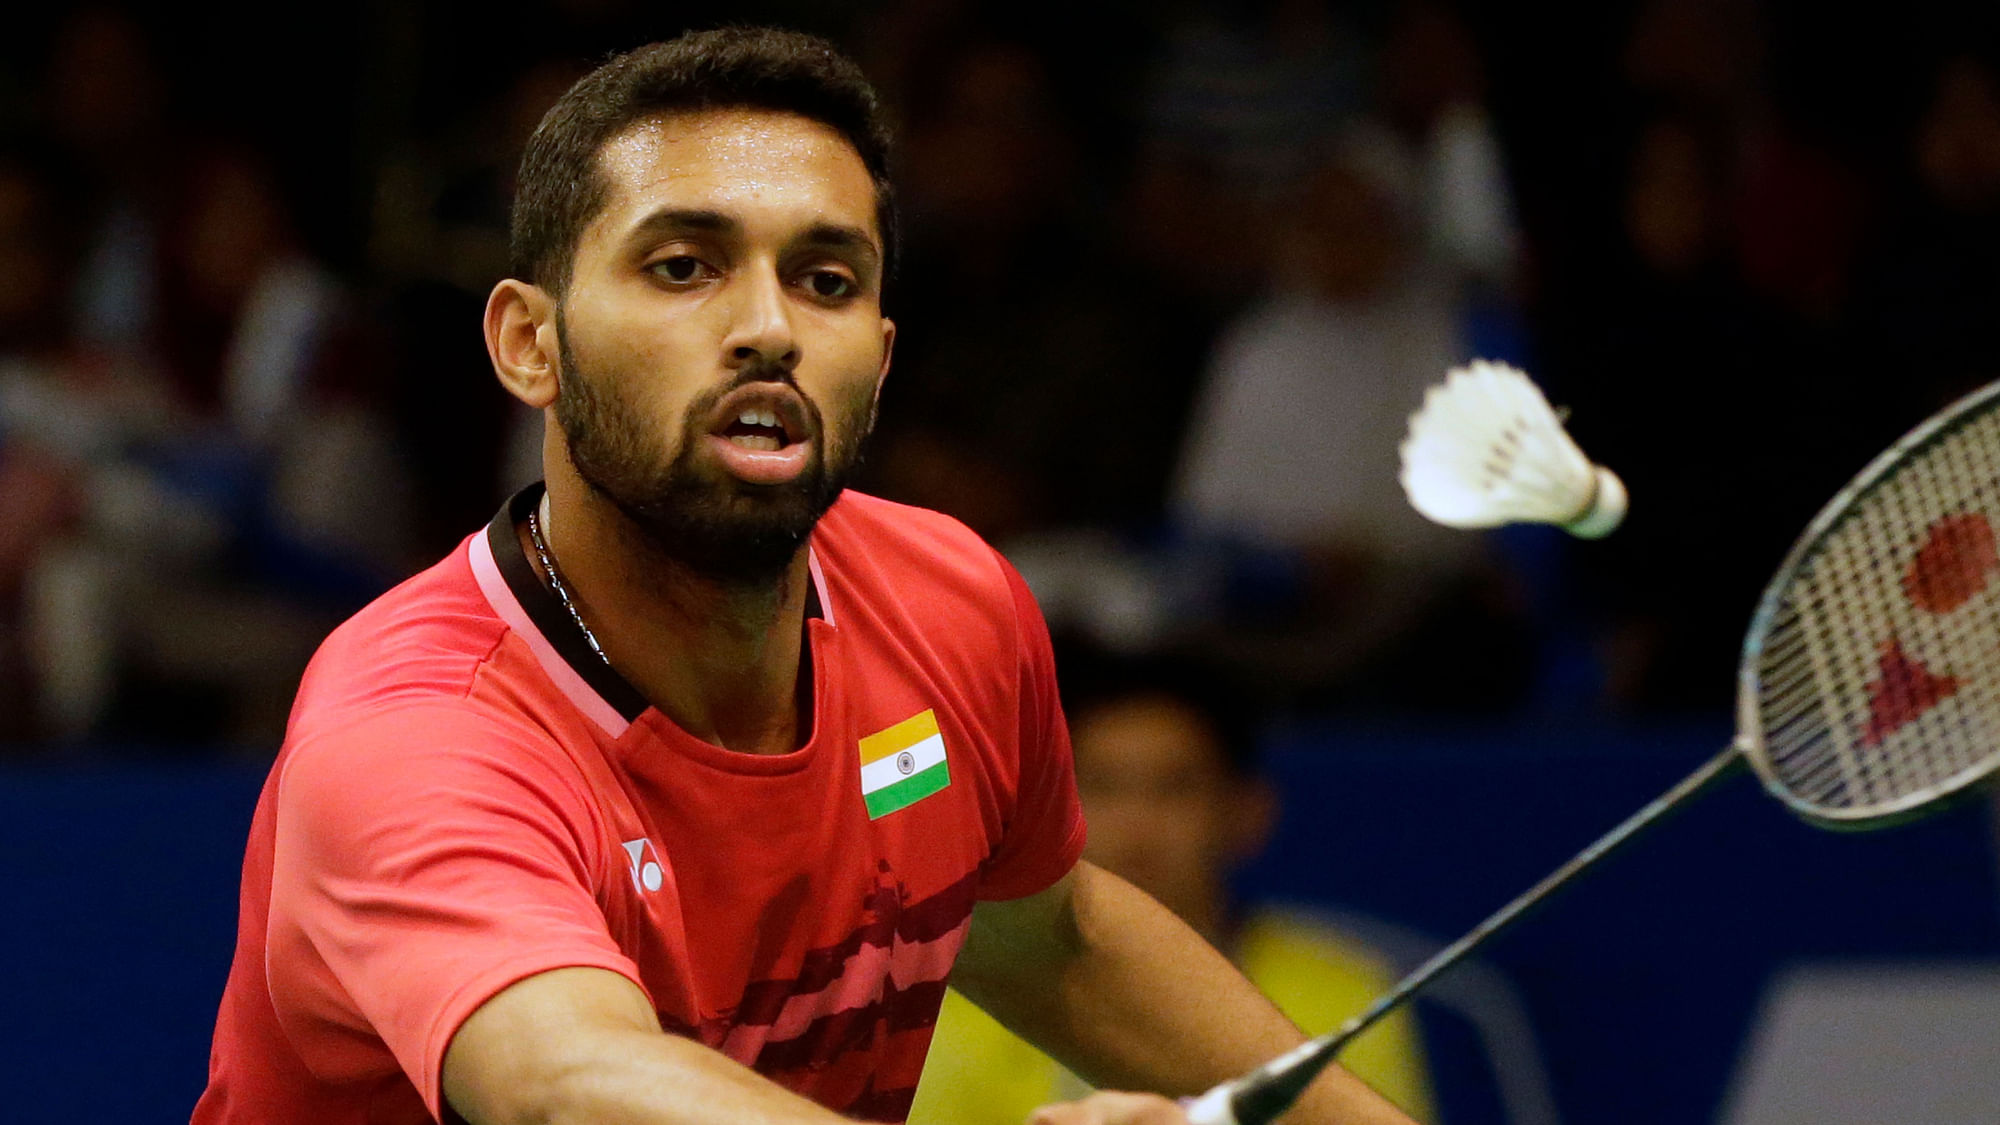 Indian shuttler HS Prannoy defeated 11th seed Lin Dan to enter the third round of the BWF World Championships.